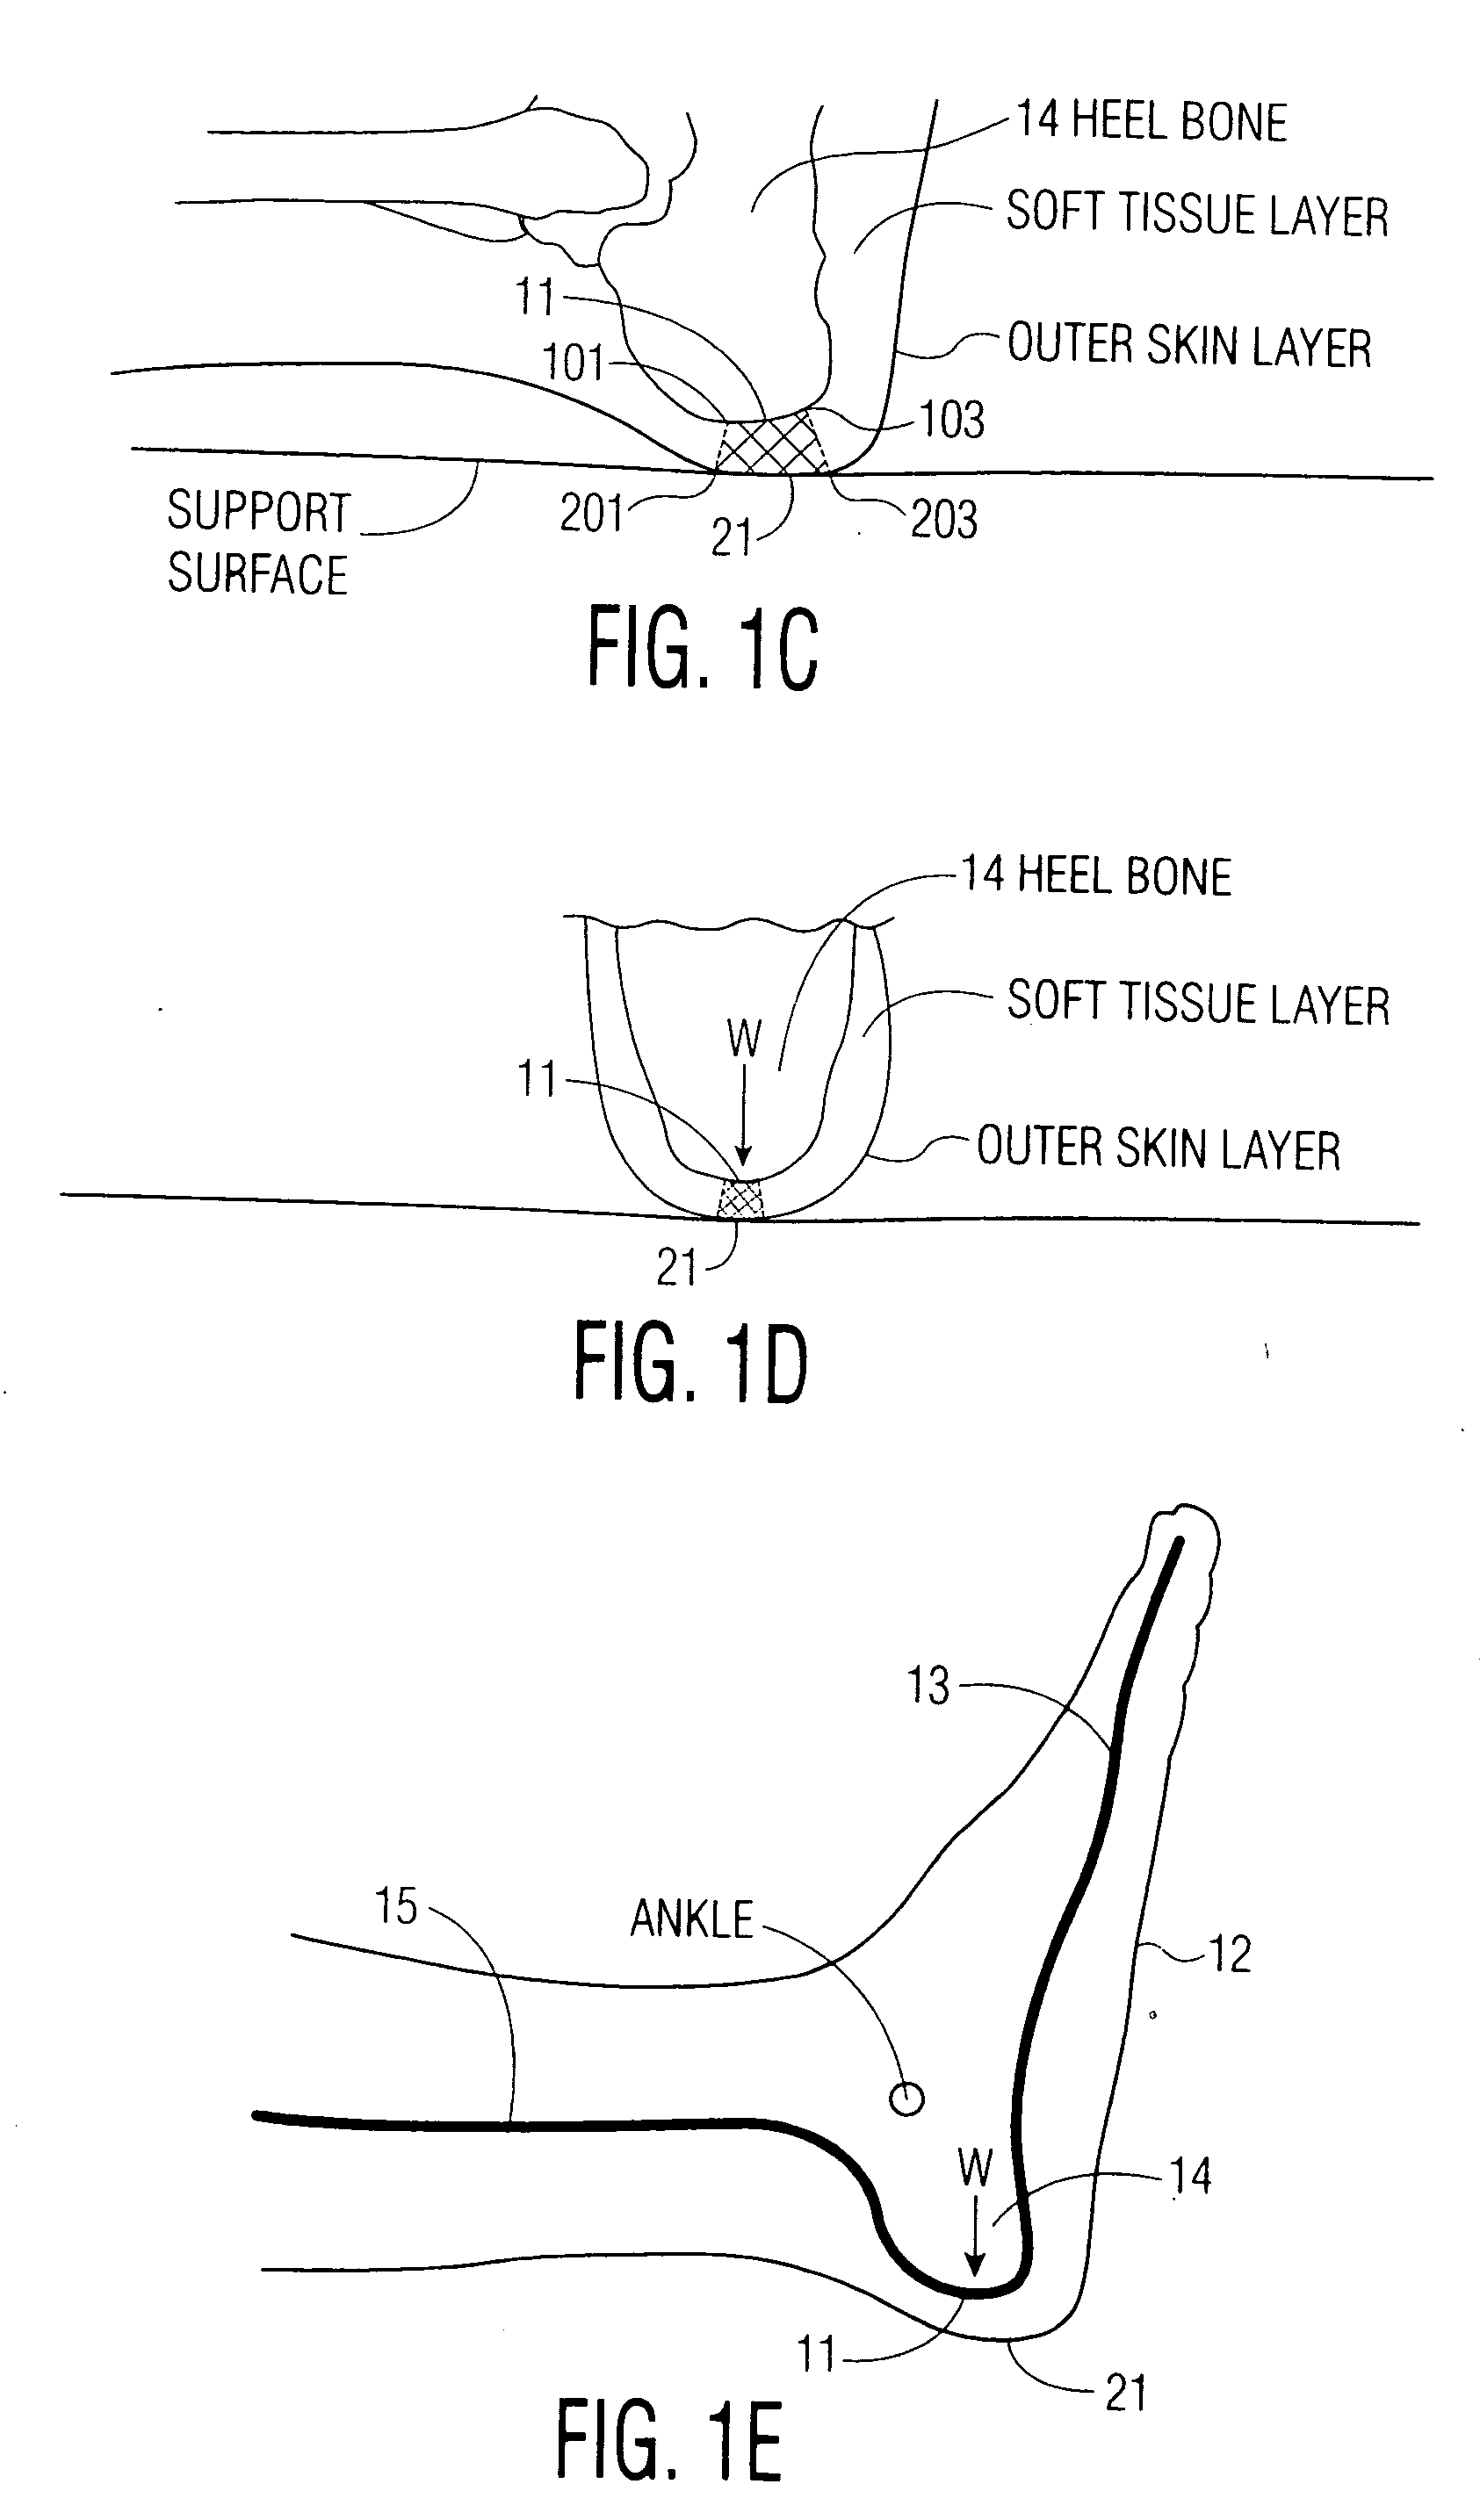 Apparatus and methods for preventing and/or healing pressure ulcers